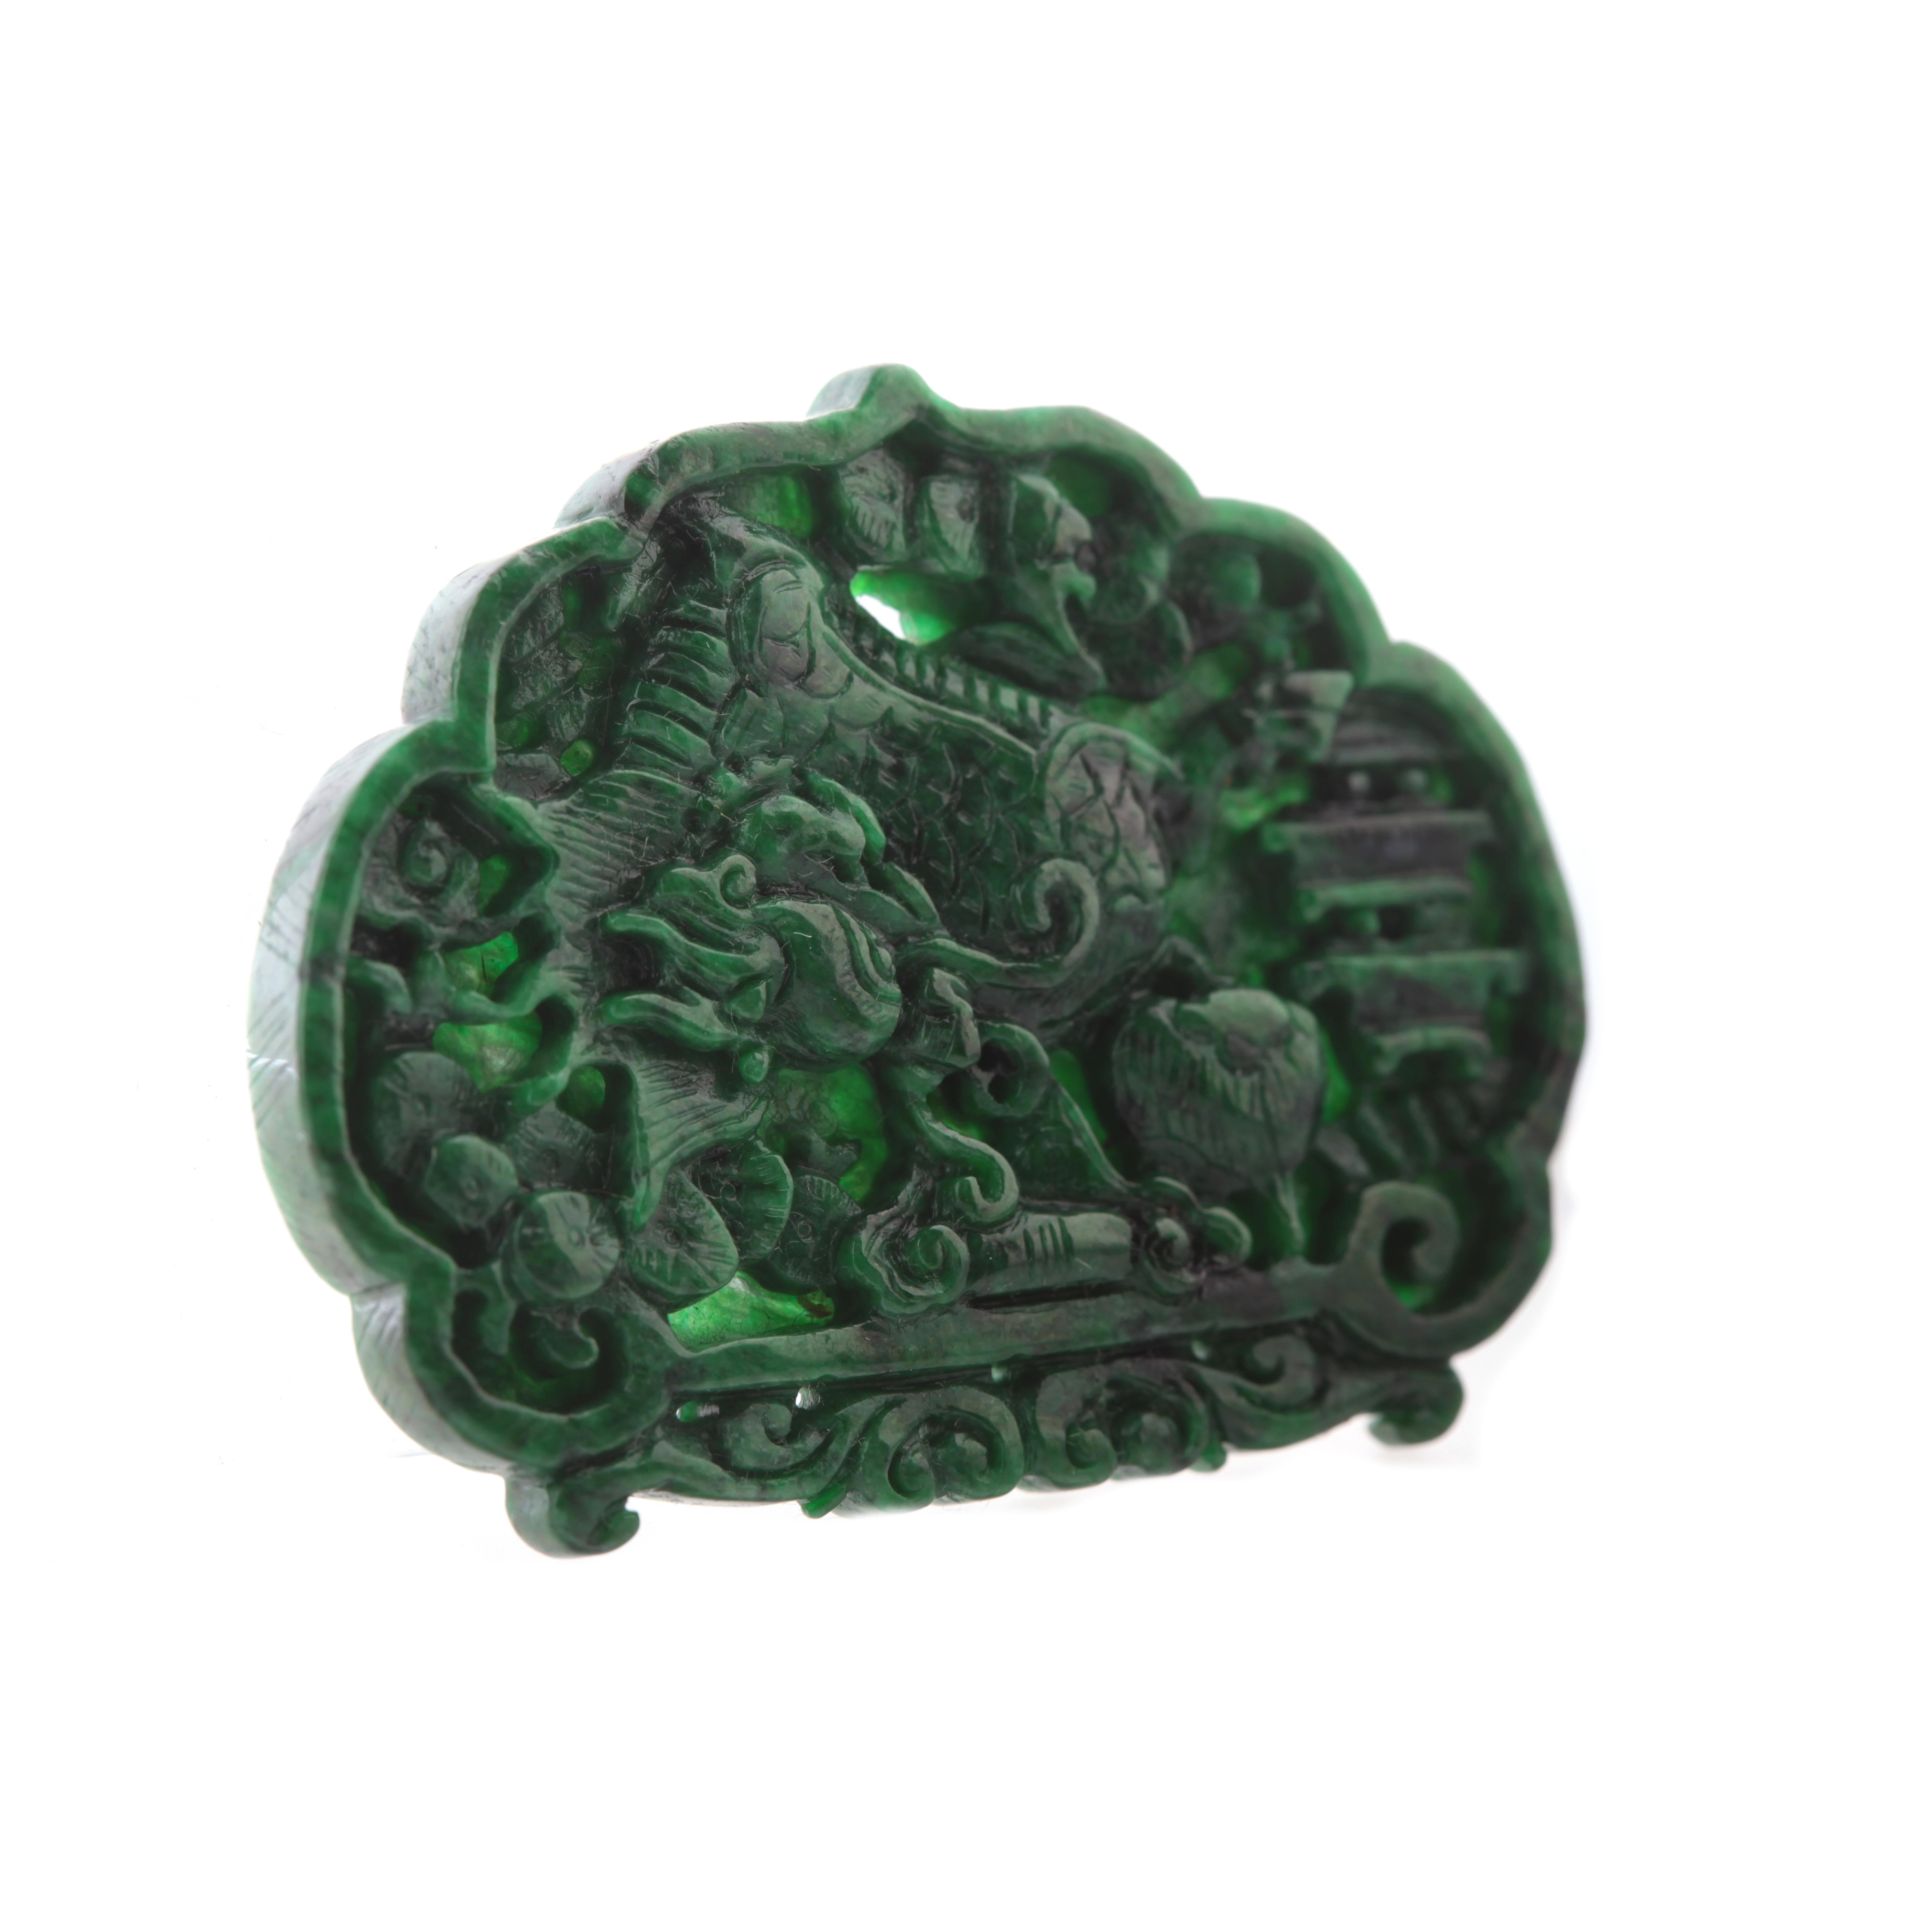 Chinese Export Carved Pendant Omphacite Jade Natural Jadeite Asian Art Dragon Figurine Statue